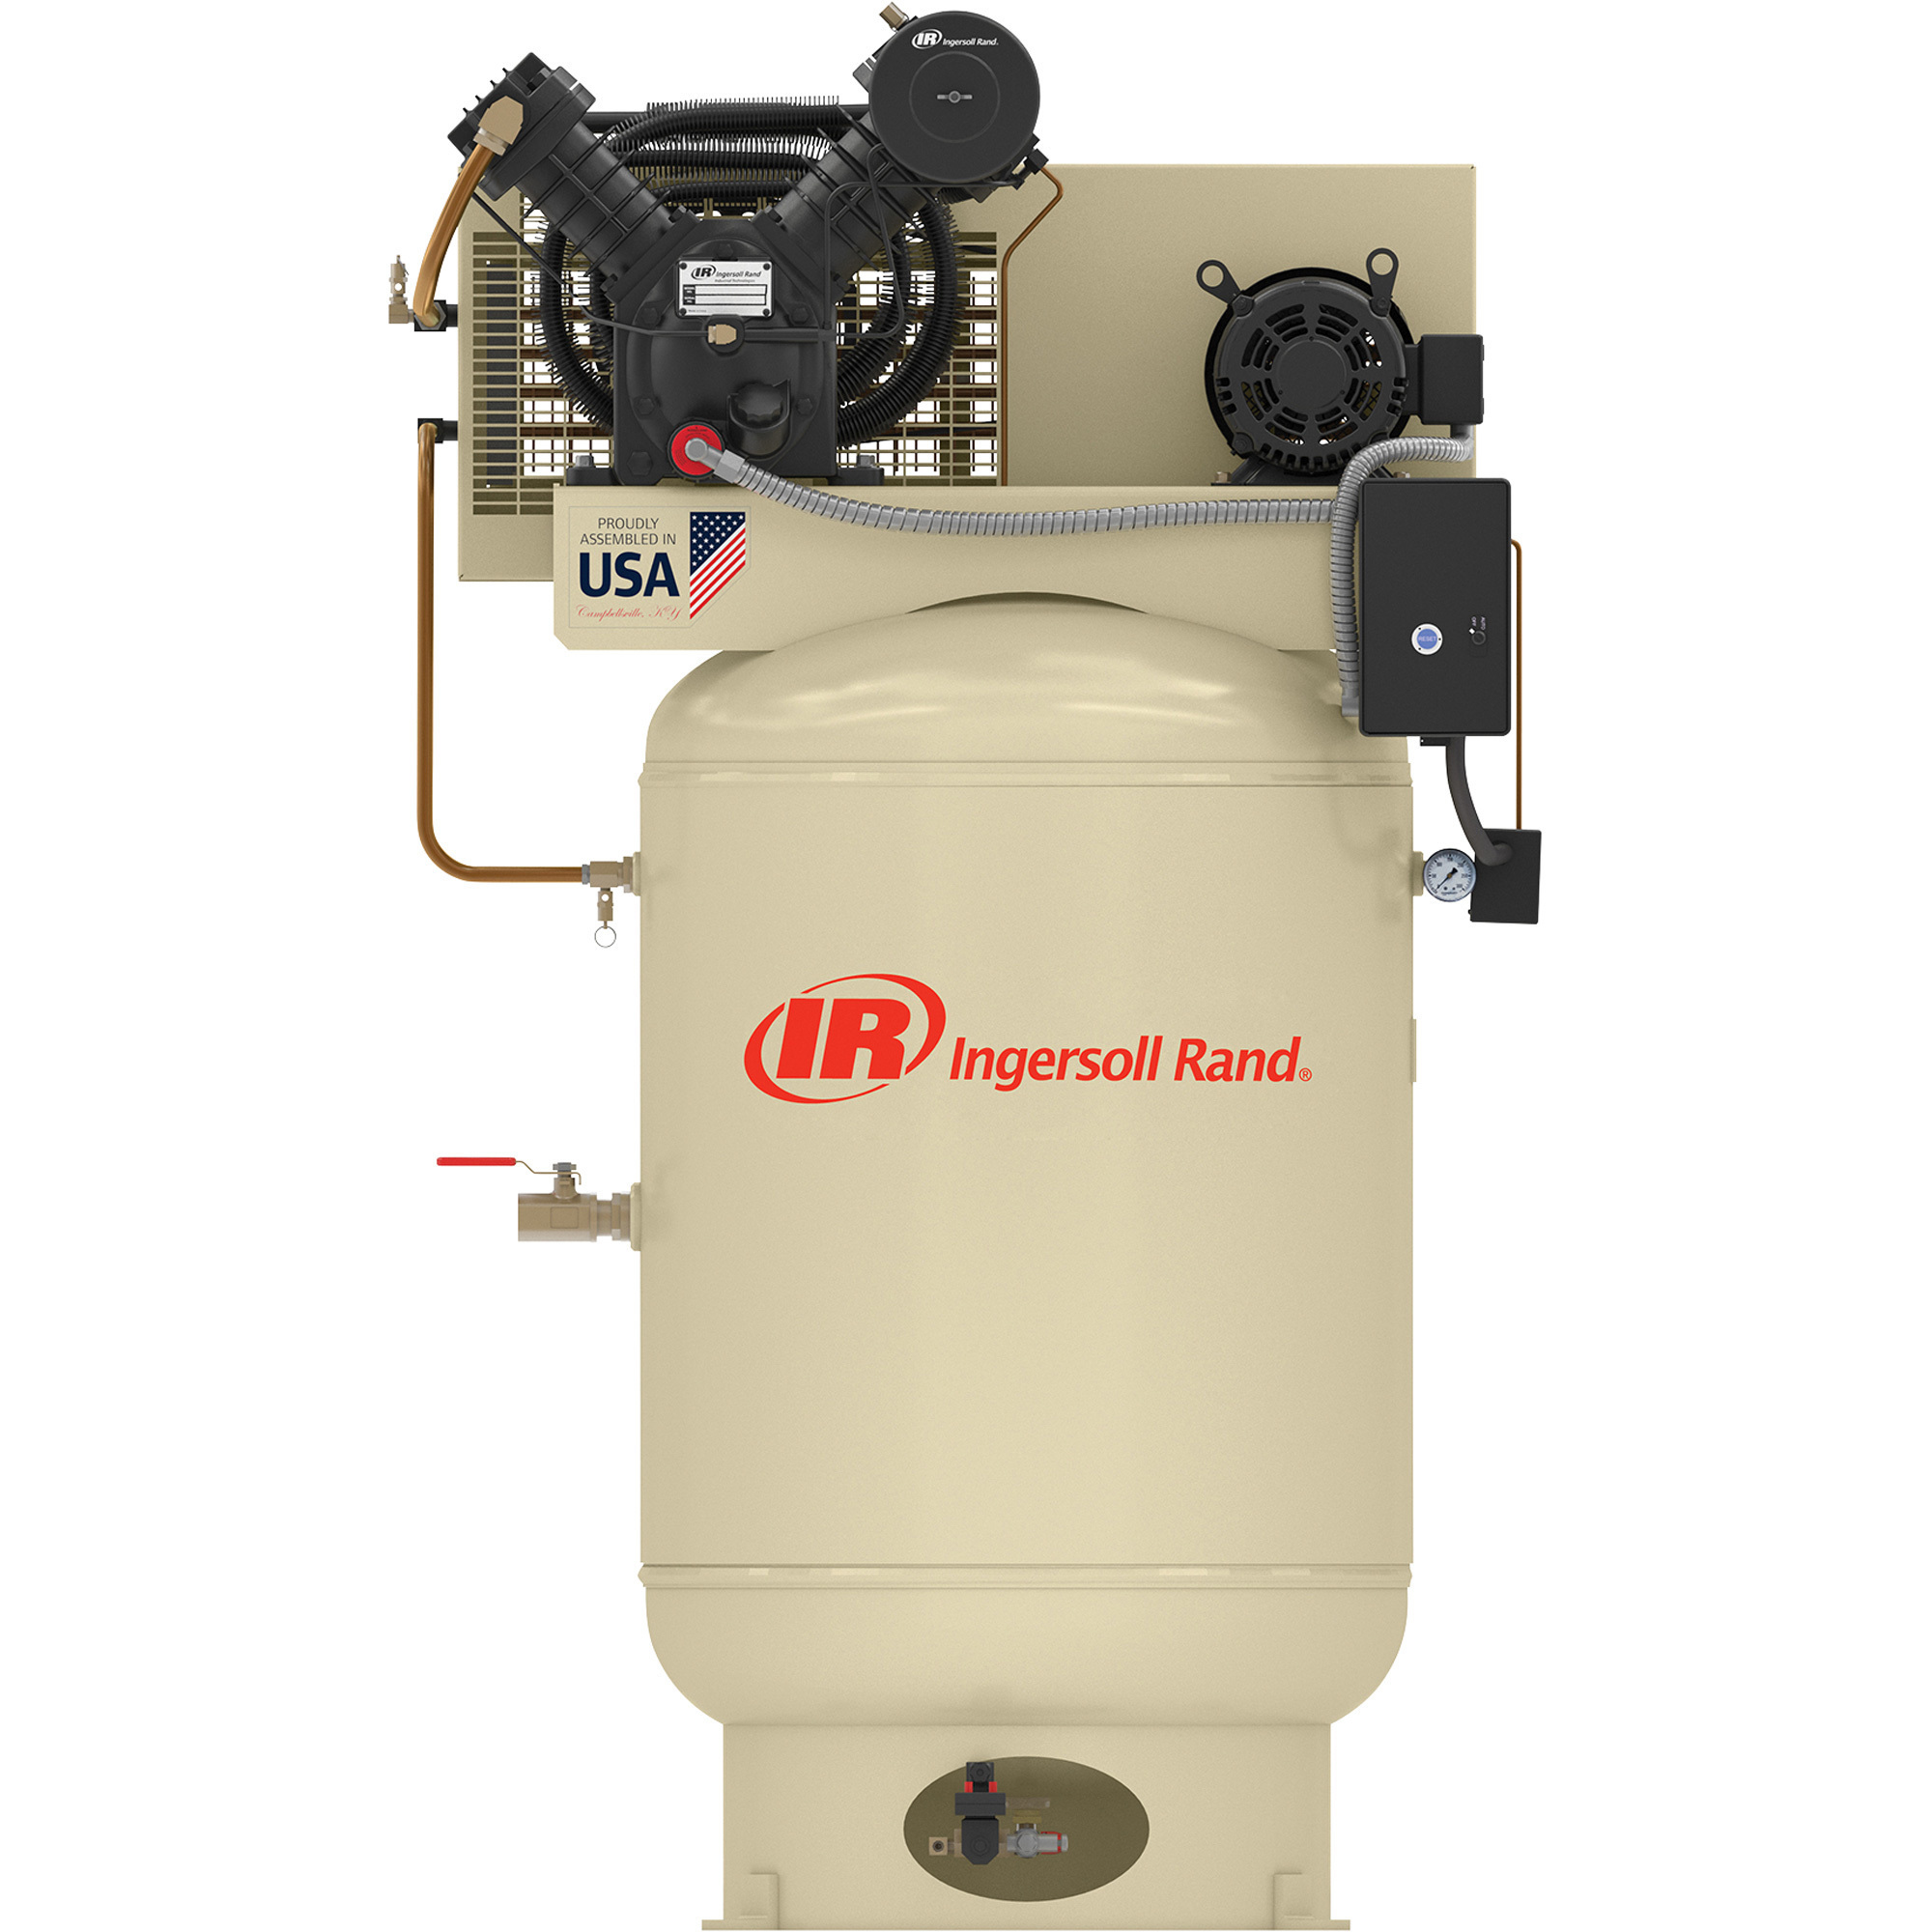 Ingersoll Rand Electric Stationary Air Compressor (Premium Package), 10 HP, 200 Volts, 3 Phase, 120 Gallon Vertical, 35 CFM At 175 PSI, Model 2545K10-